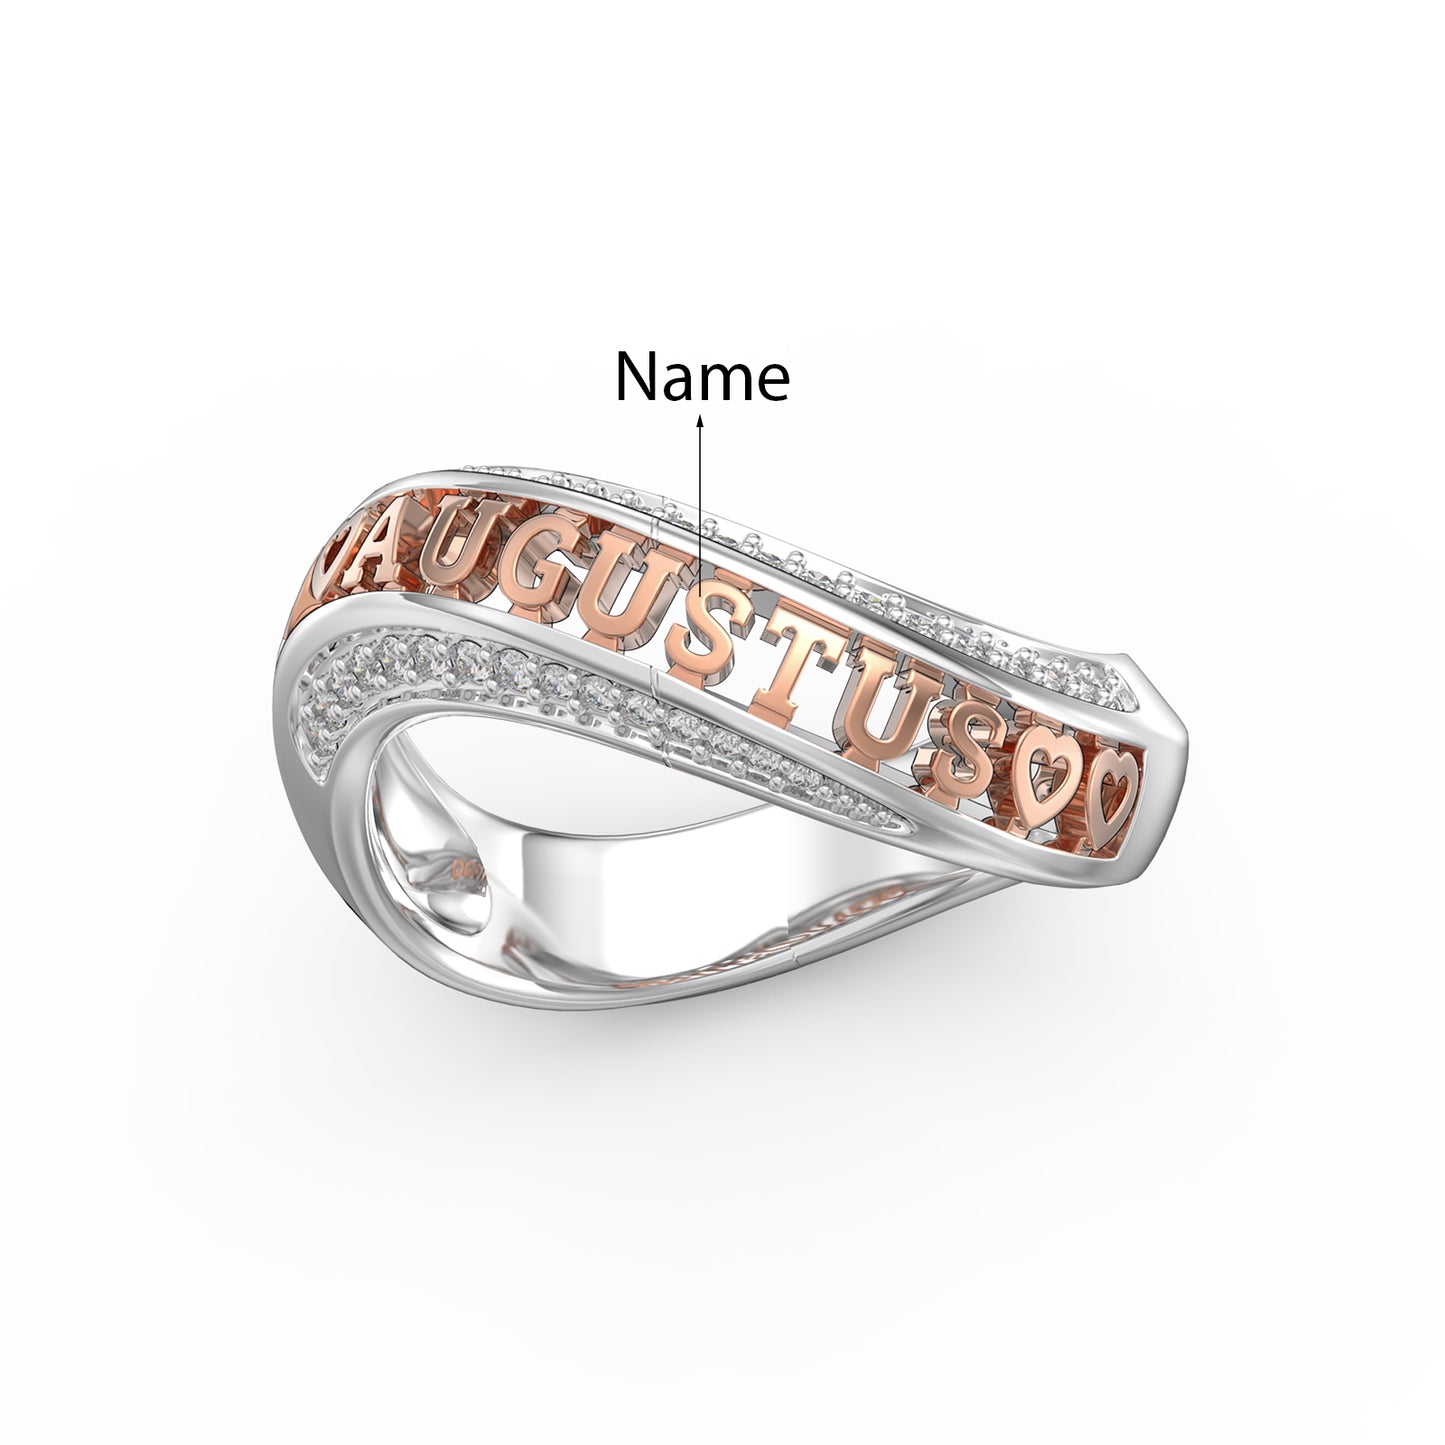 Name of Love Curve Couple 3D Rings